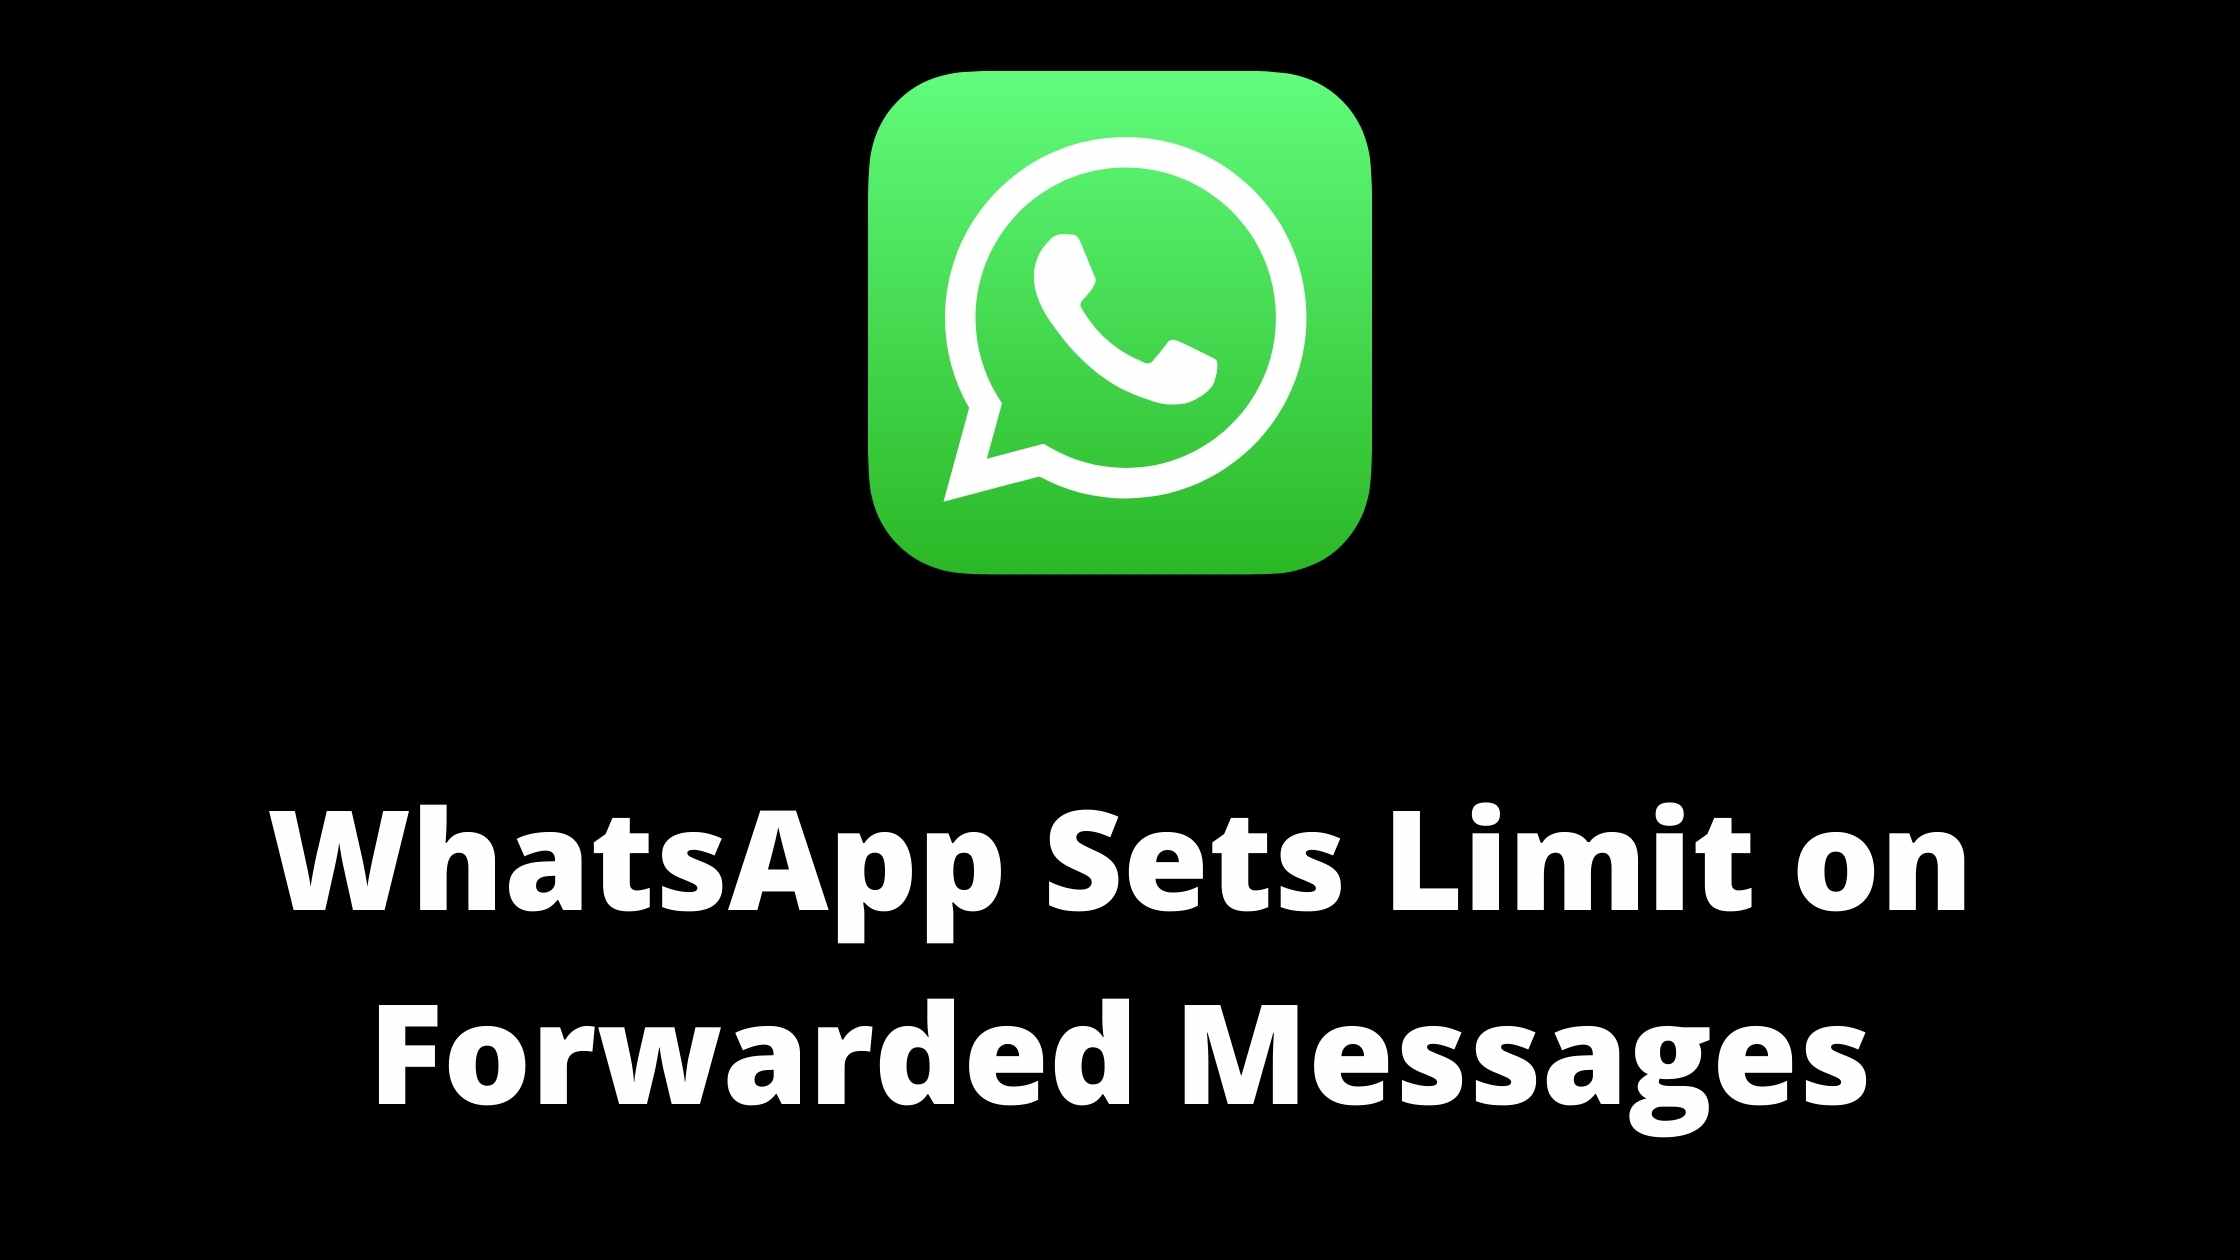 whatsapp sets limit on Forwarded messages